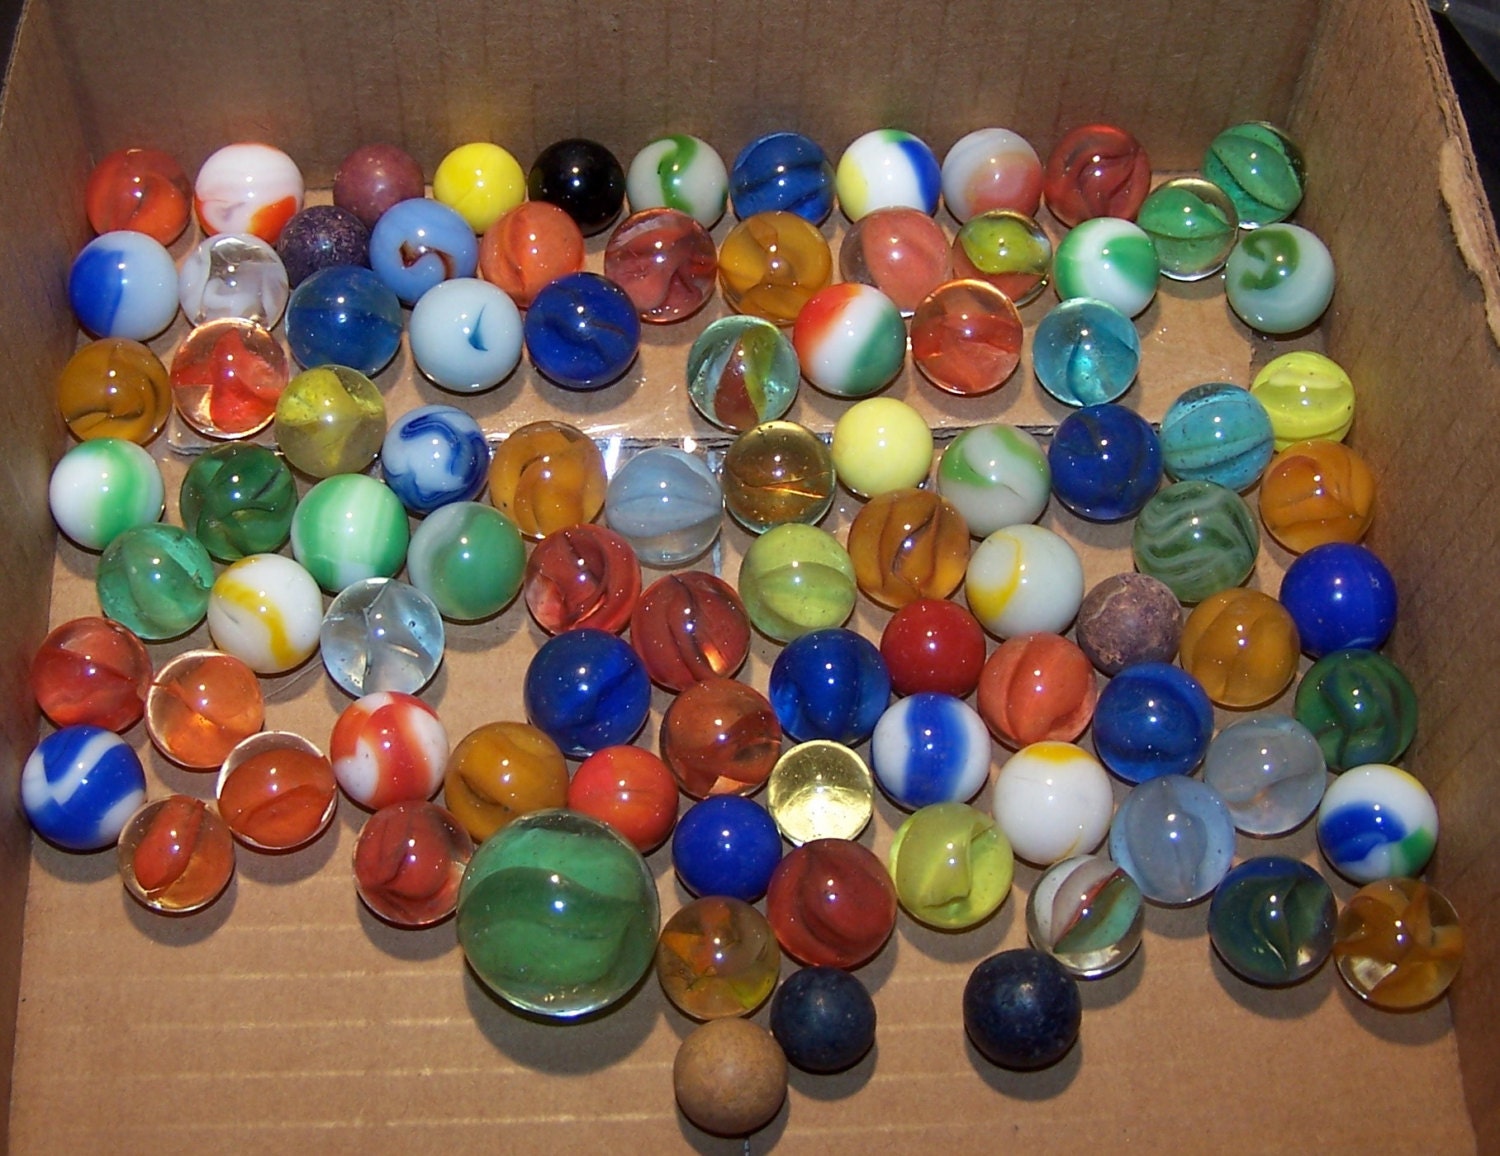 Vintage Marble King & Vitro Agate Marbles Antique Clays